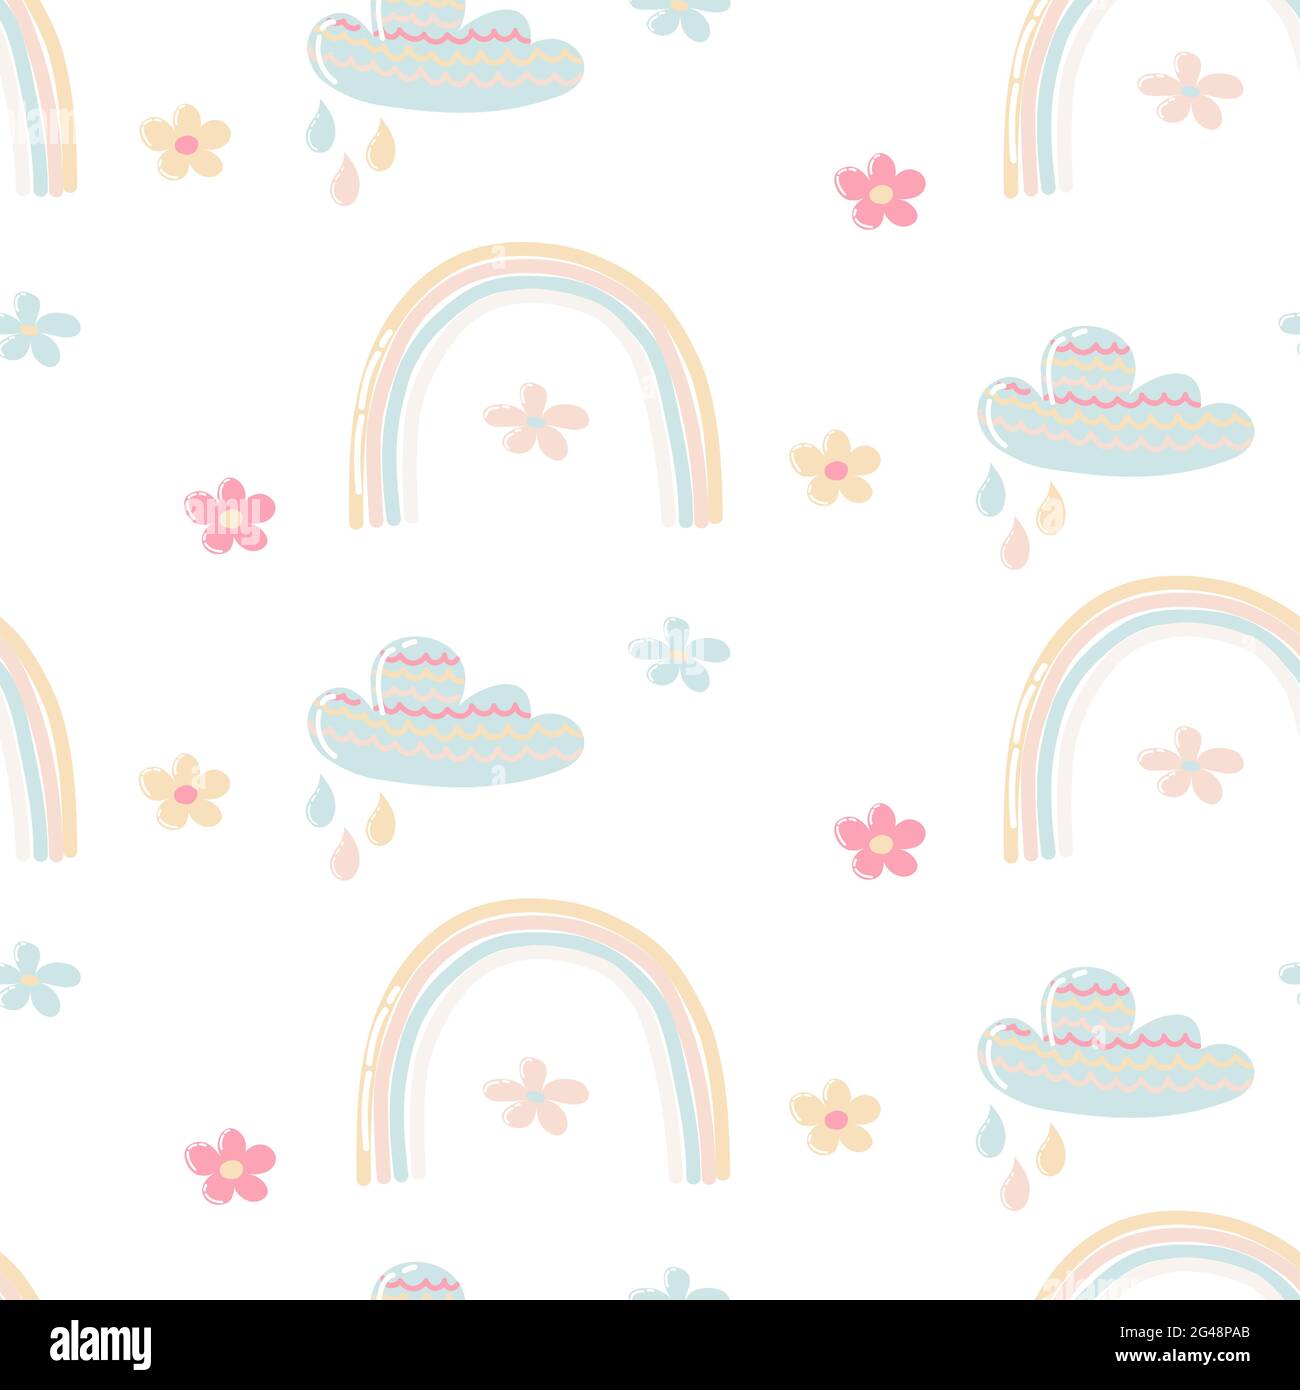 Seamless pattern with cartoon rainbow, cloud and flowers on white background.Cute baby background for printing on wrapping paper, fabric, clothes. Stock Vector